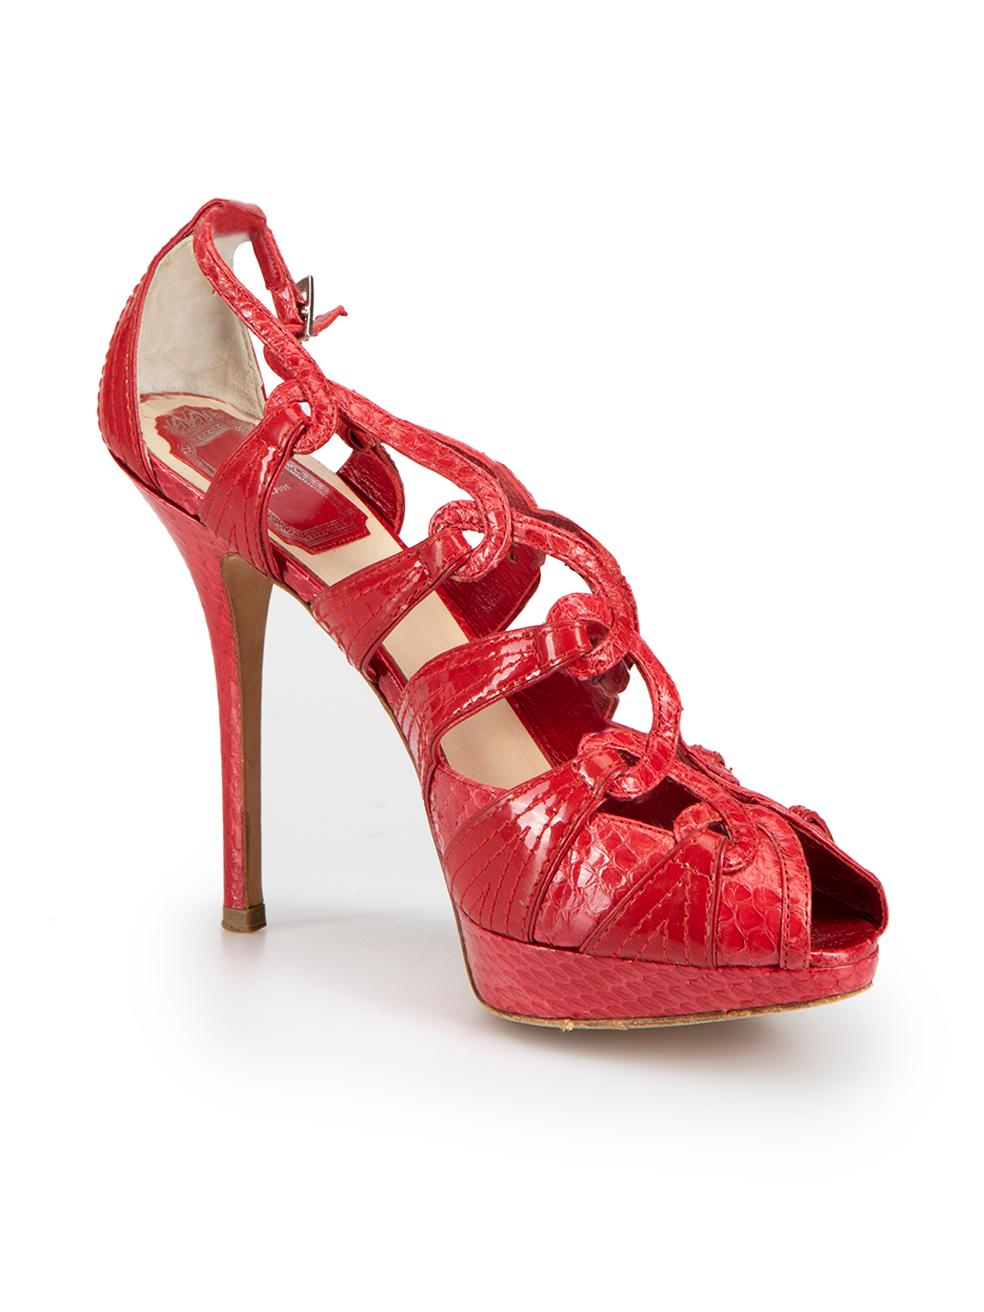 CONDITION is Very good. Minimal wear to sandals is evident. Minimal wear to back of heels and outer soles on this used Christian Dior designer resale item. 



Details


Red

Patent leather and python leather

Strappy sandals

Contrast panel

Peep